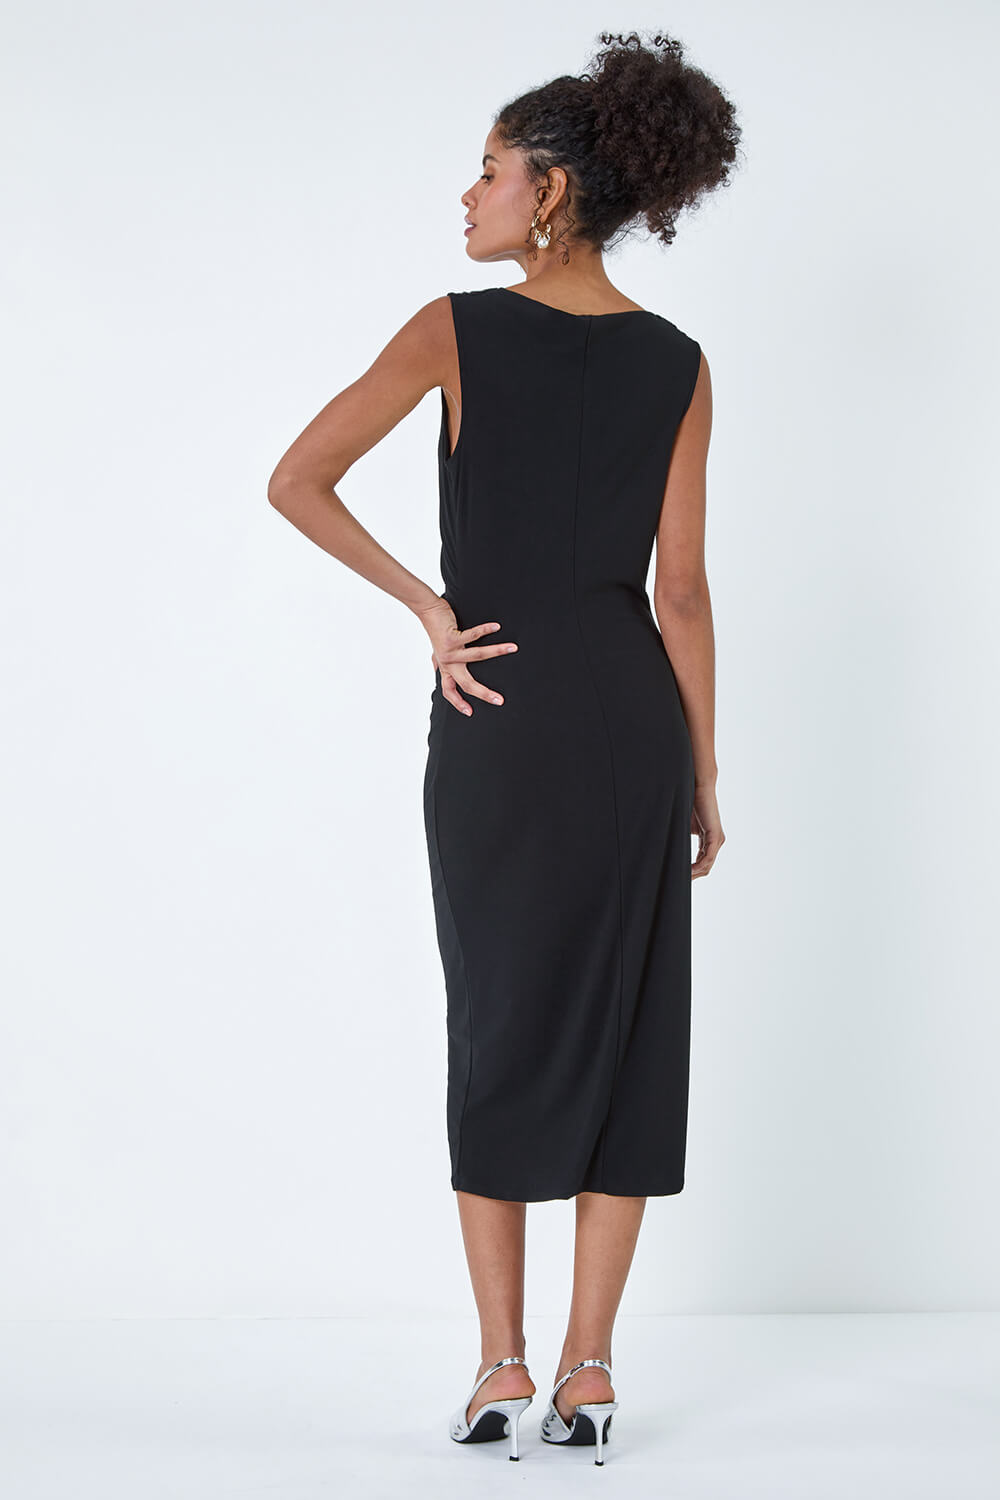 Black Ruched Cowl Neck Stretch Midi Dress, Image 2 of 5